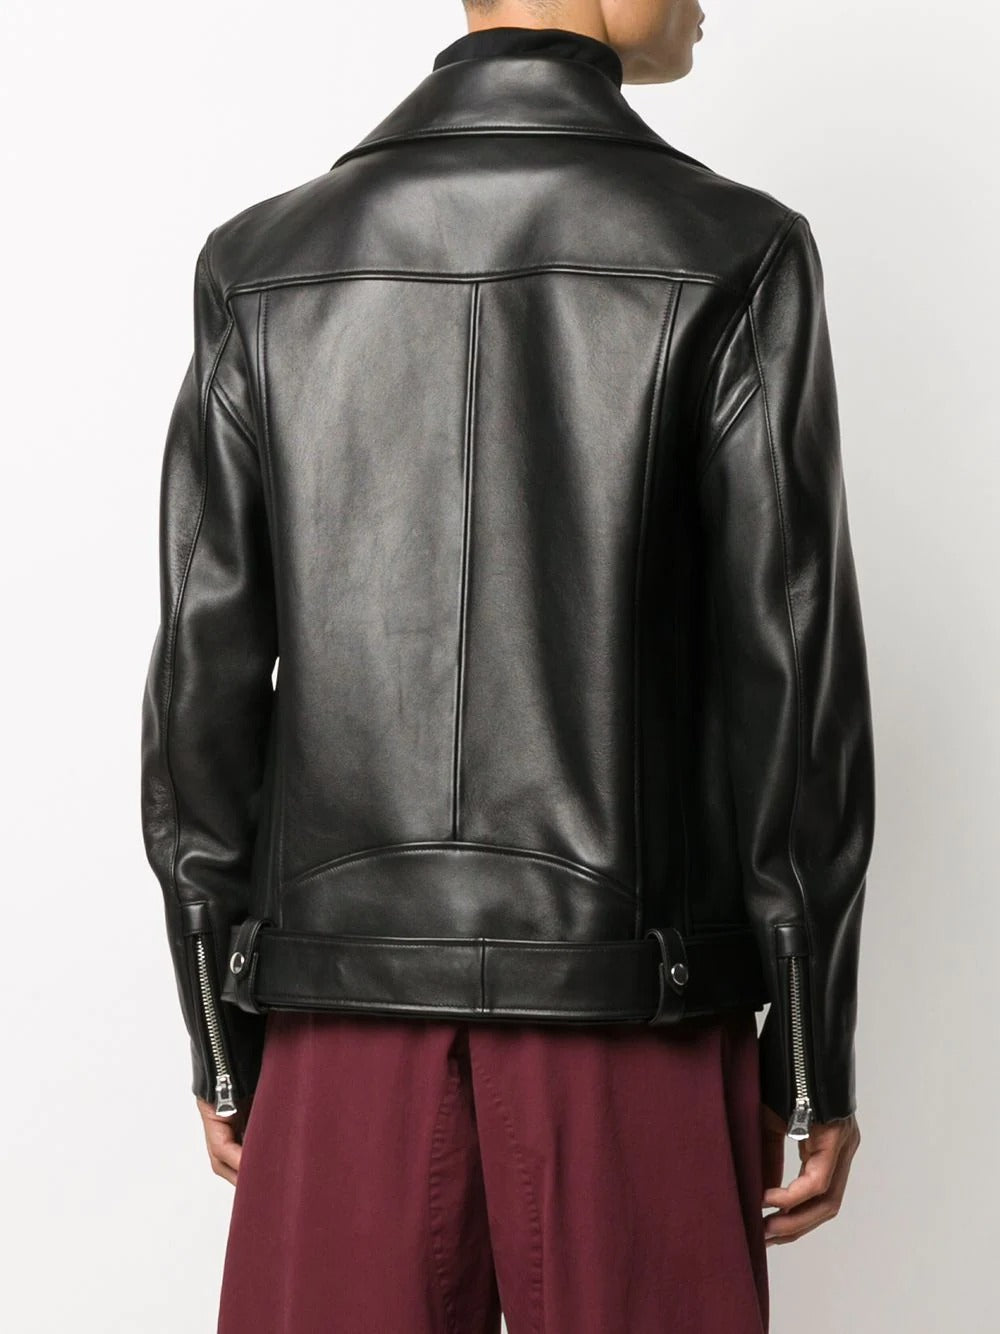 ACNE STUDIOS-LEATHER OUTERWEAR-B70075 900